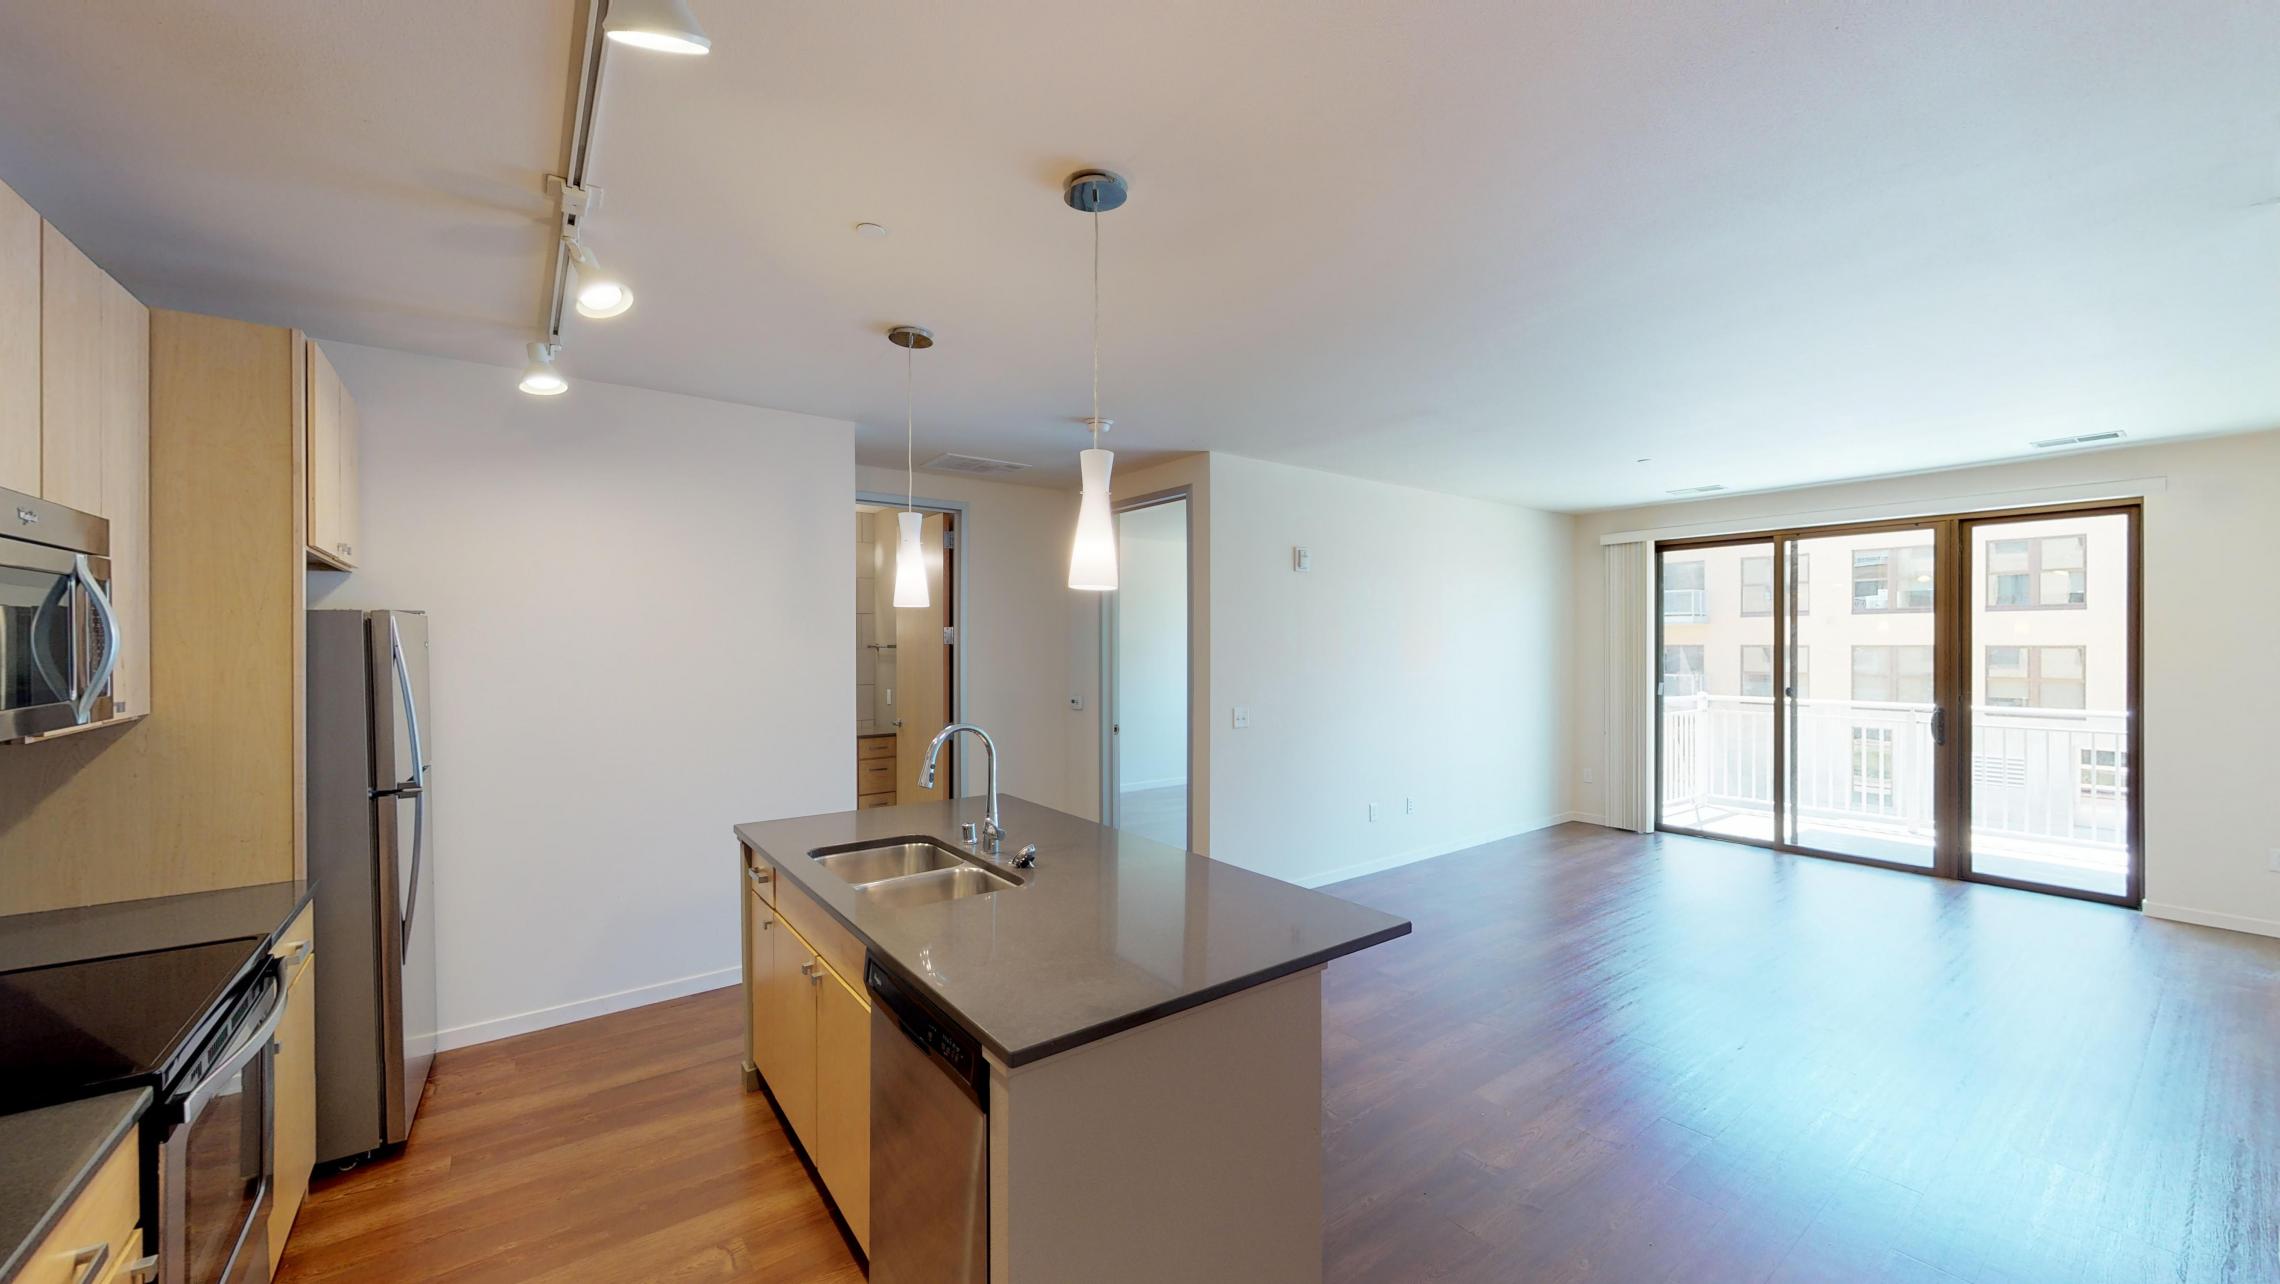 Nine-Line-Apartment-222-One-Bedroom-Living-Kitchen-Upscale-Modern-Design-Downtown-Madison-Sunny-Bright-Lifestyle